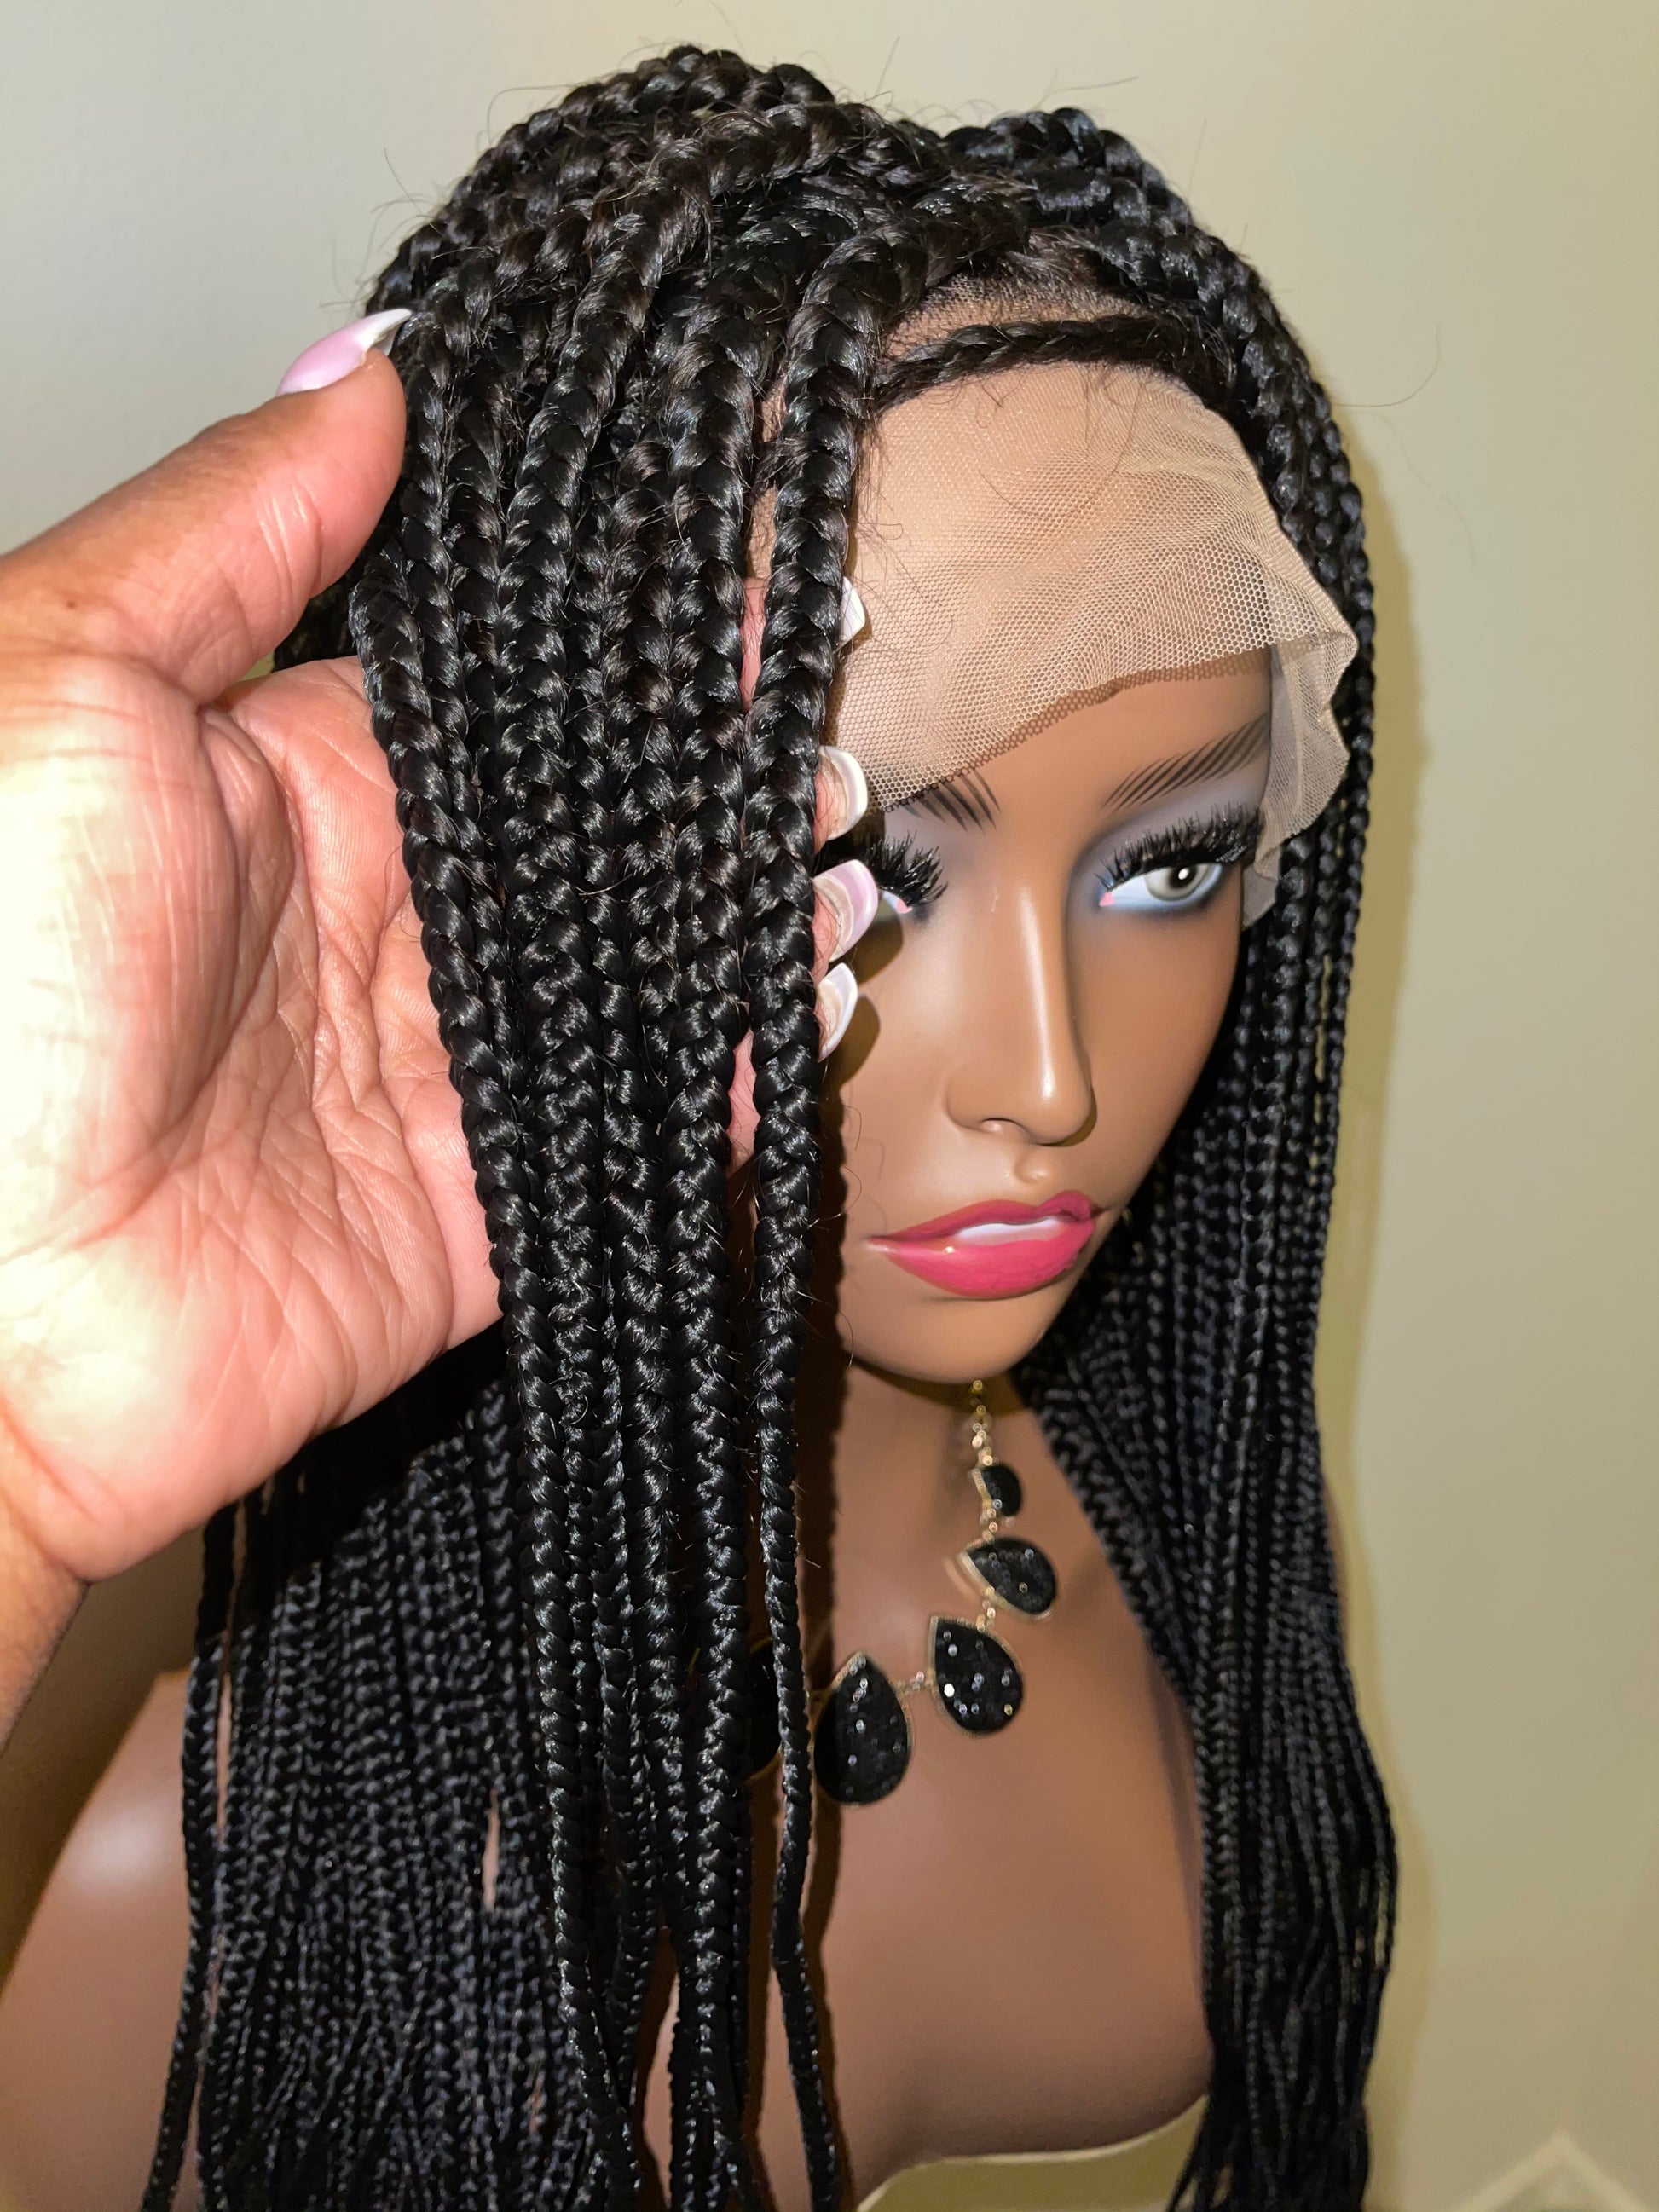 ADJUSTABLE ELASTIC BAND FOR BRAIDED WIGS 